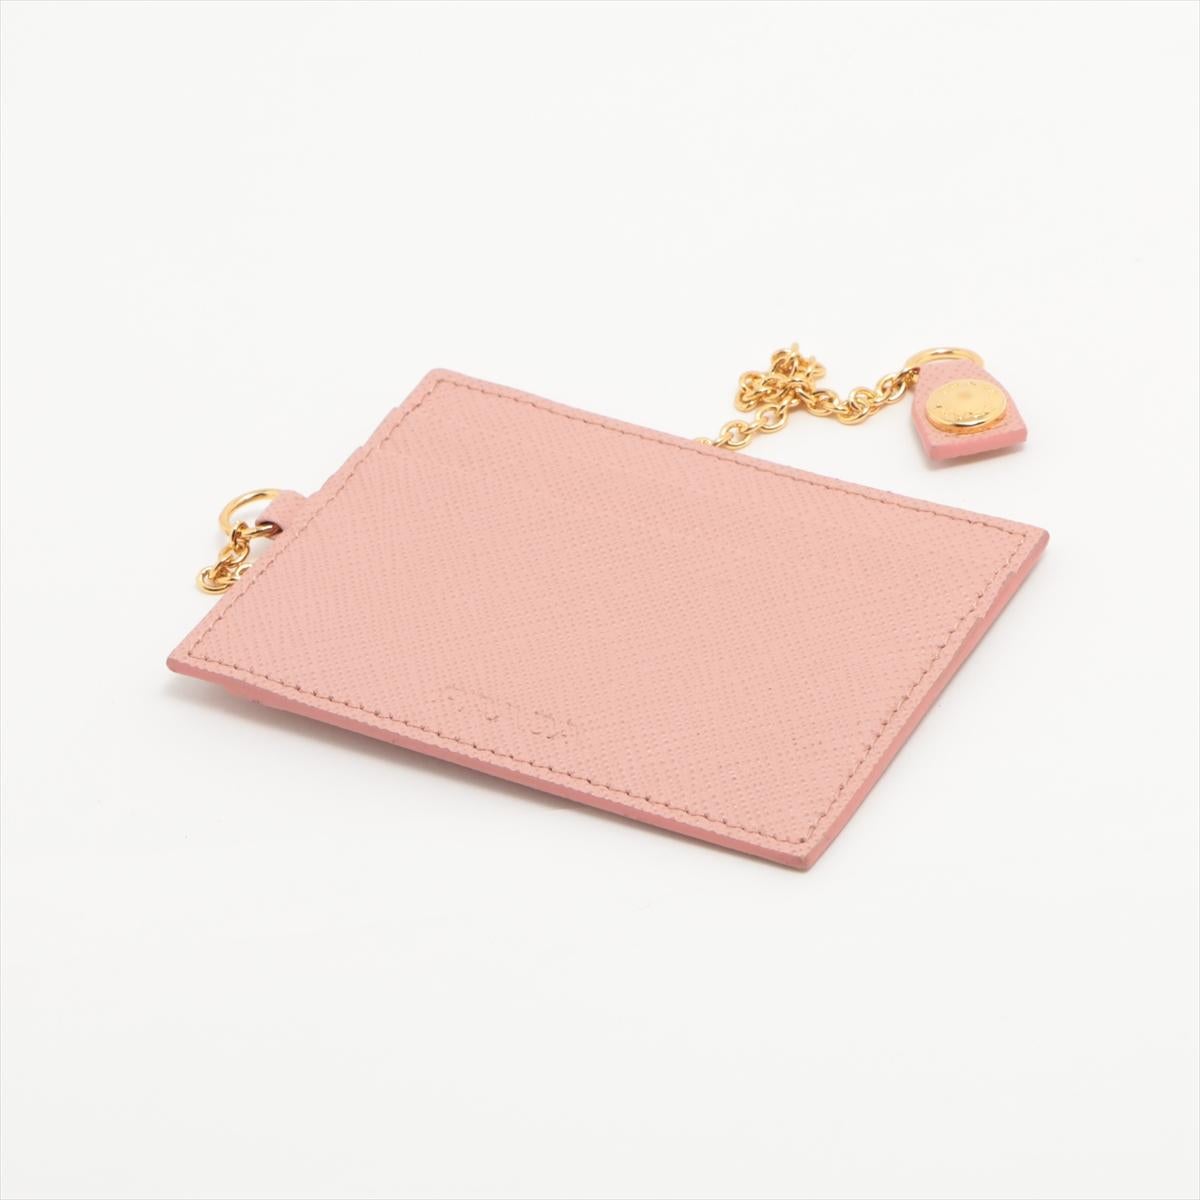 Prada Ribbon Saffiano Leather Wallet Pink For Sale 8